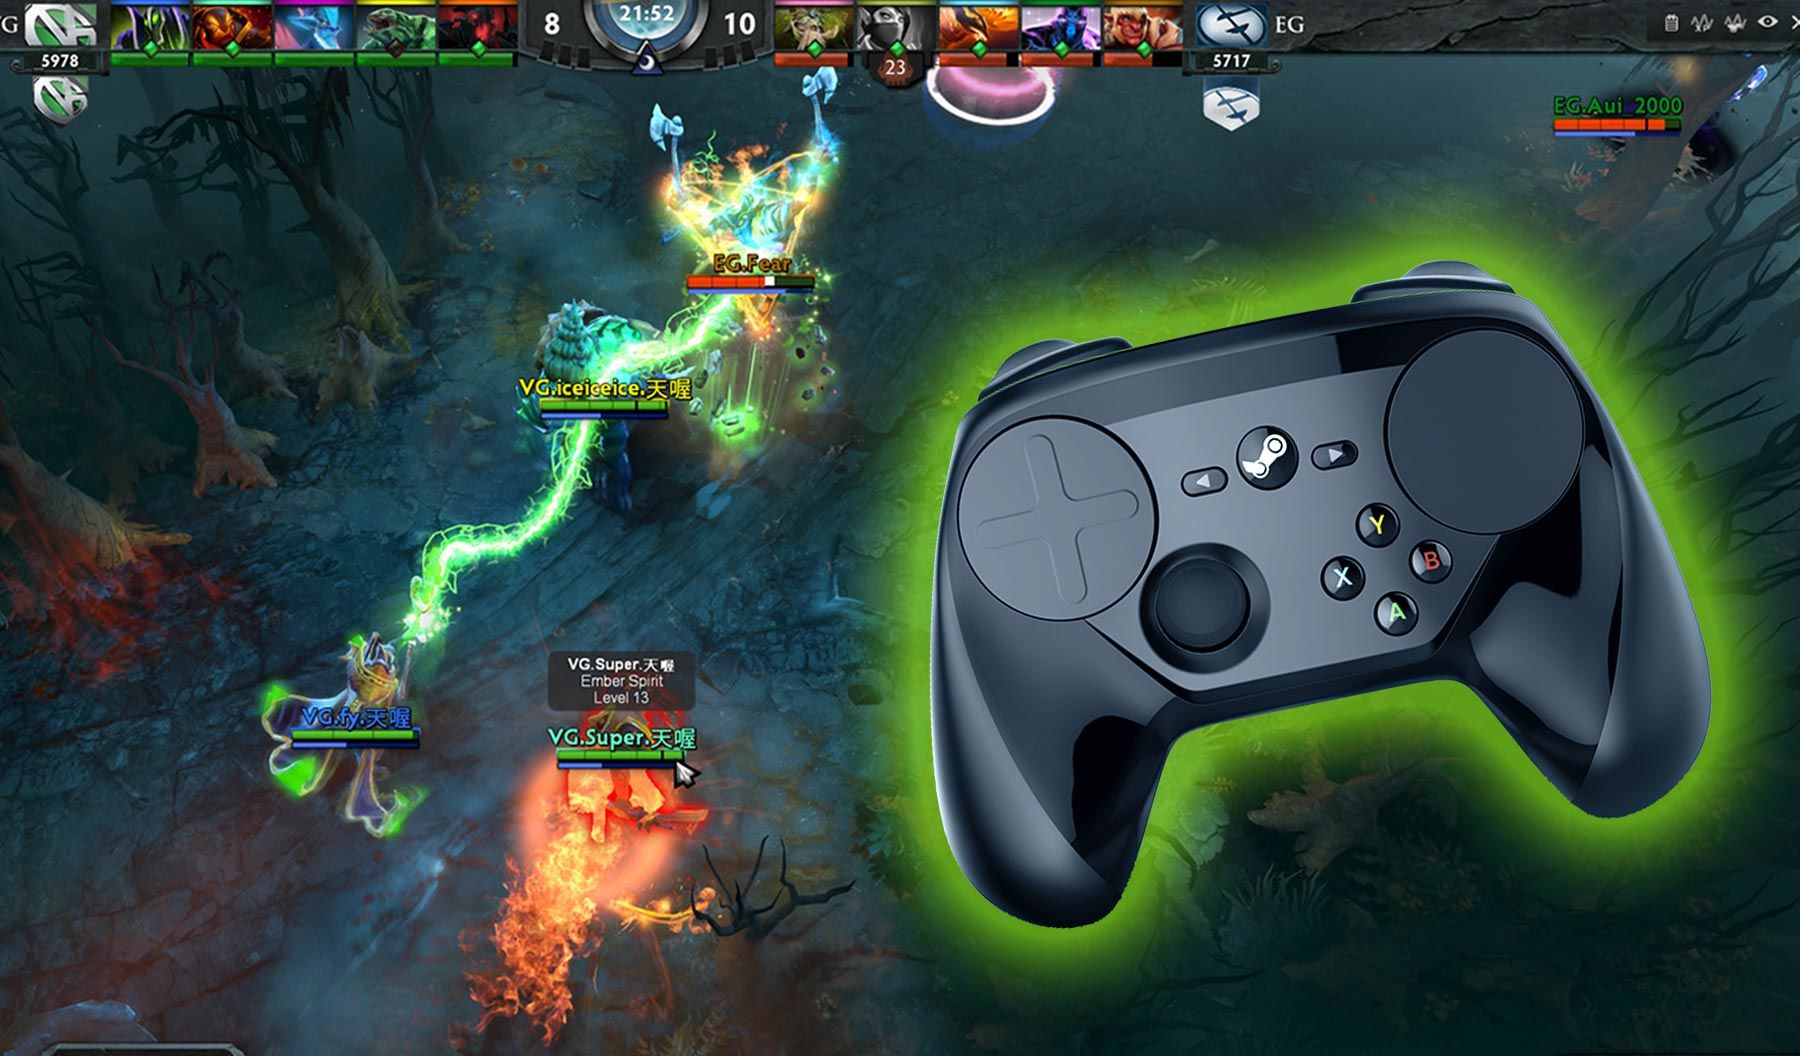 Playing Dota 2 with a gamepad: main pros and cons